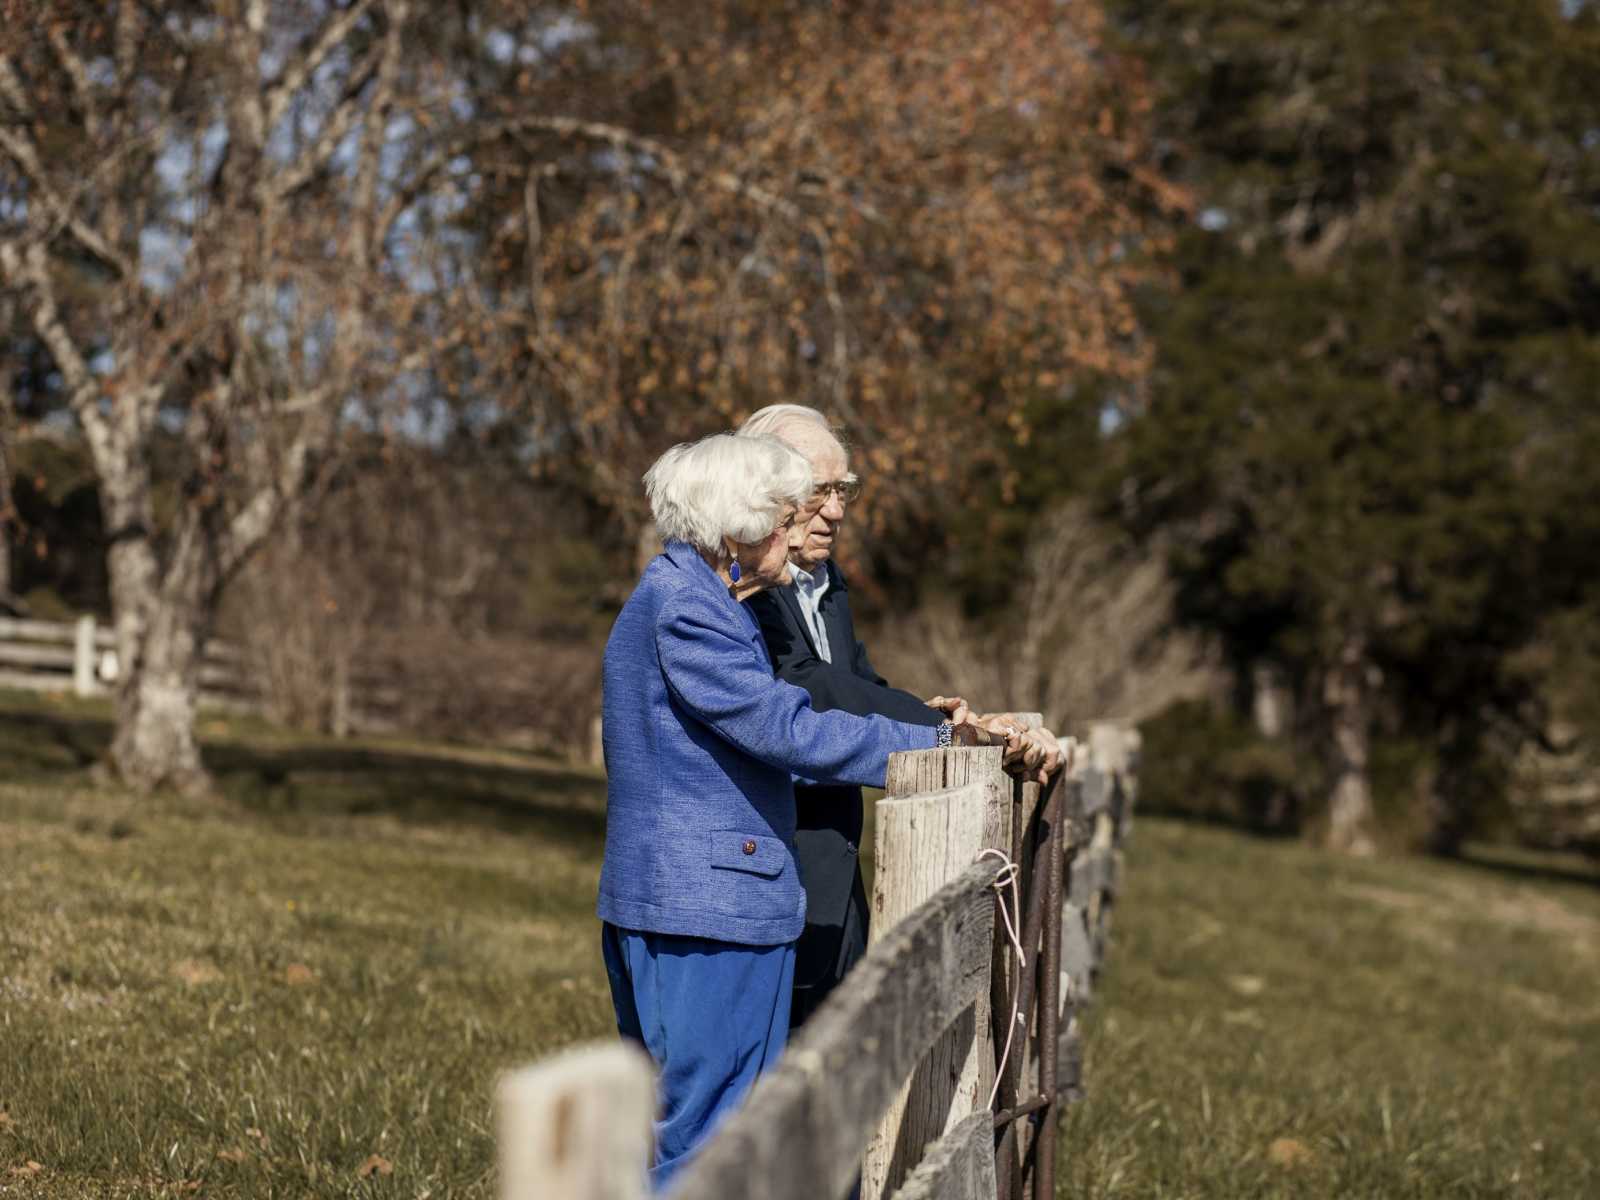 Husband stands with 92 year old wife leaning against wooden fence in their yard